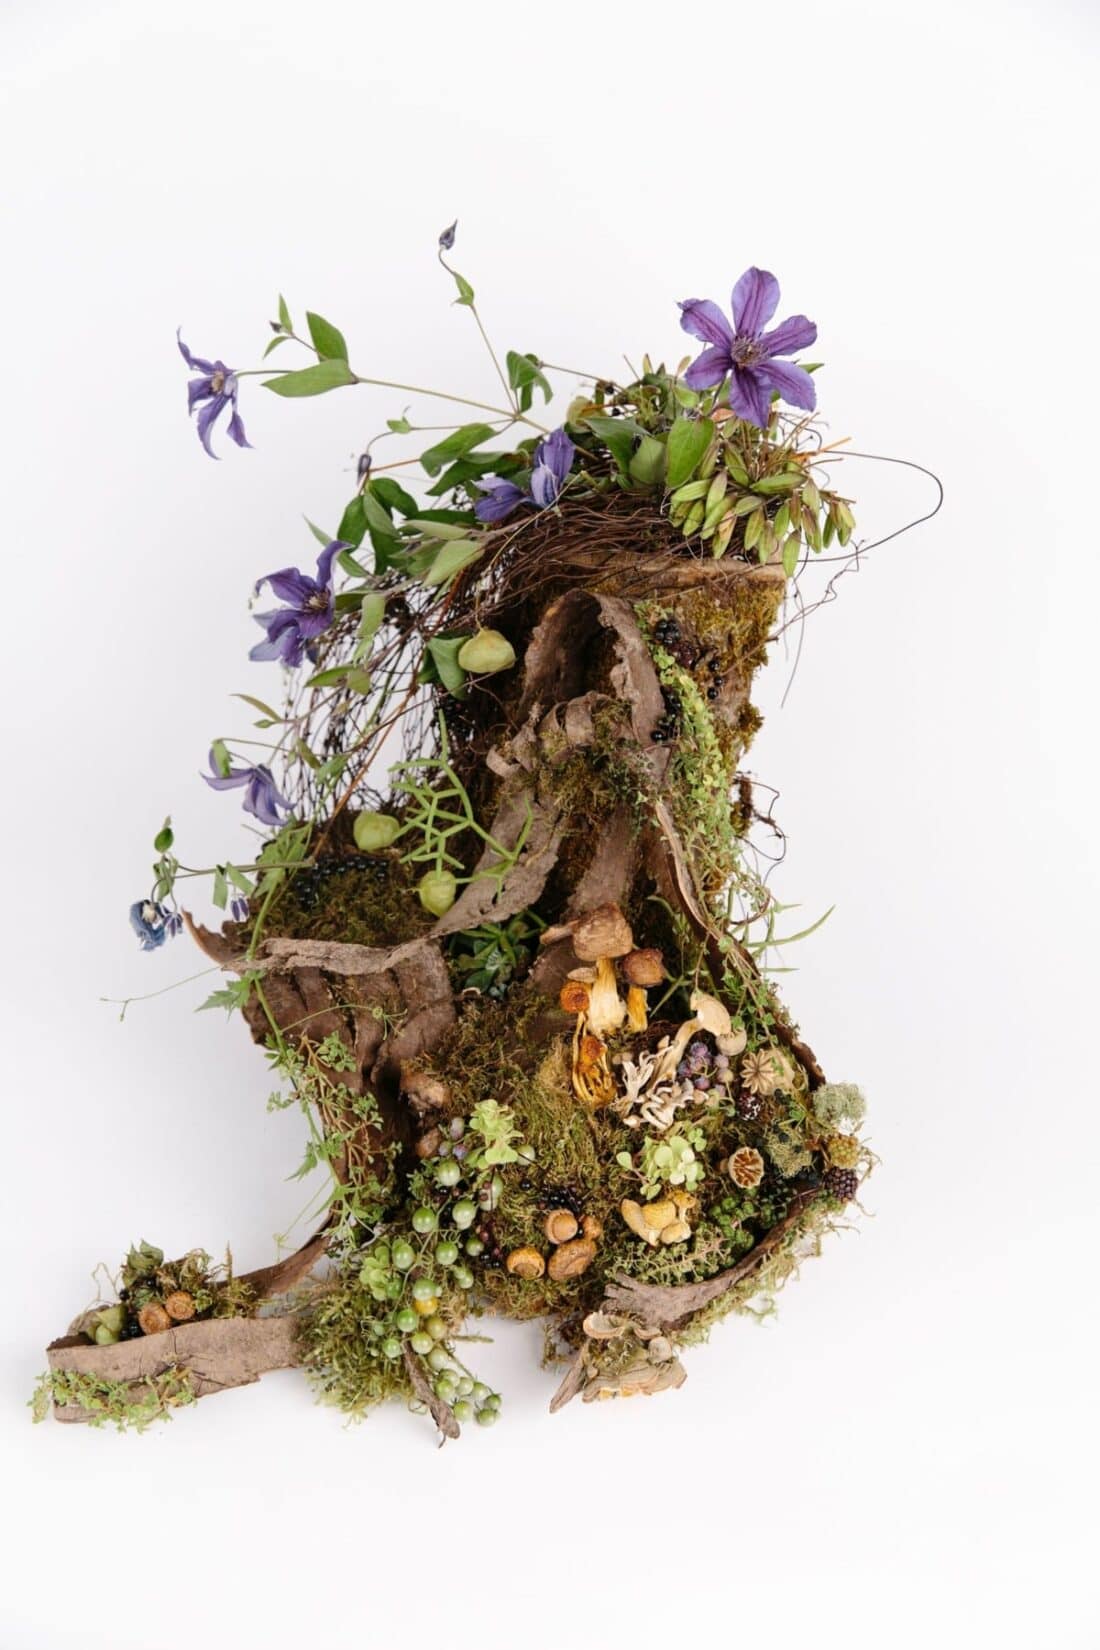 A vertical composition of woodland garden flora and fauna elements arranged artistically on a white background.